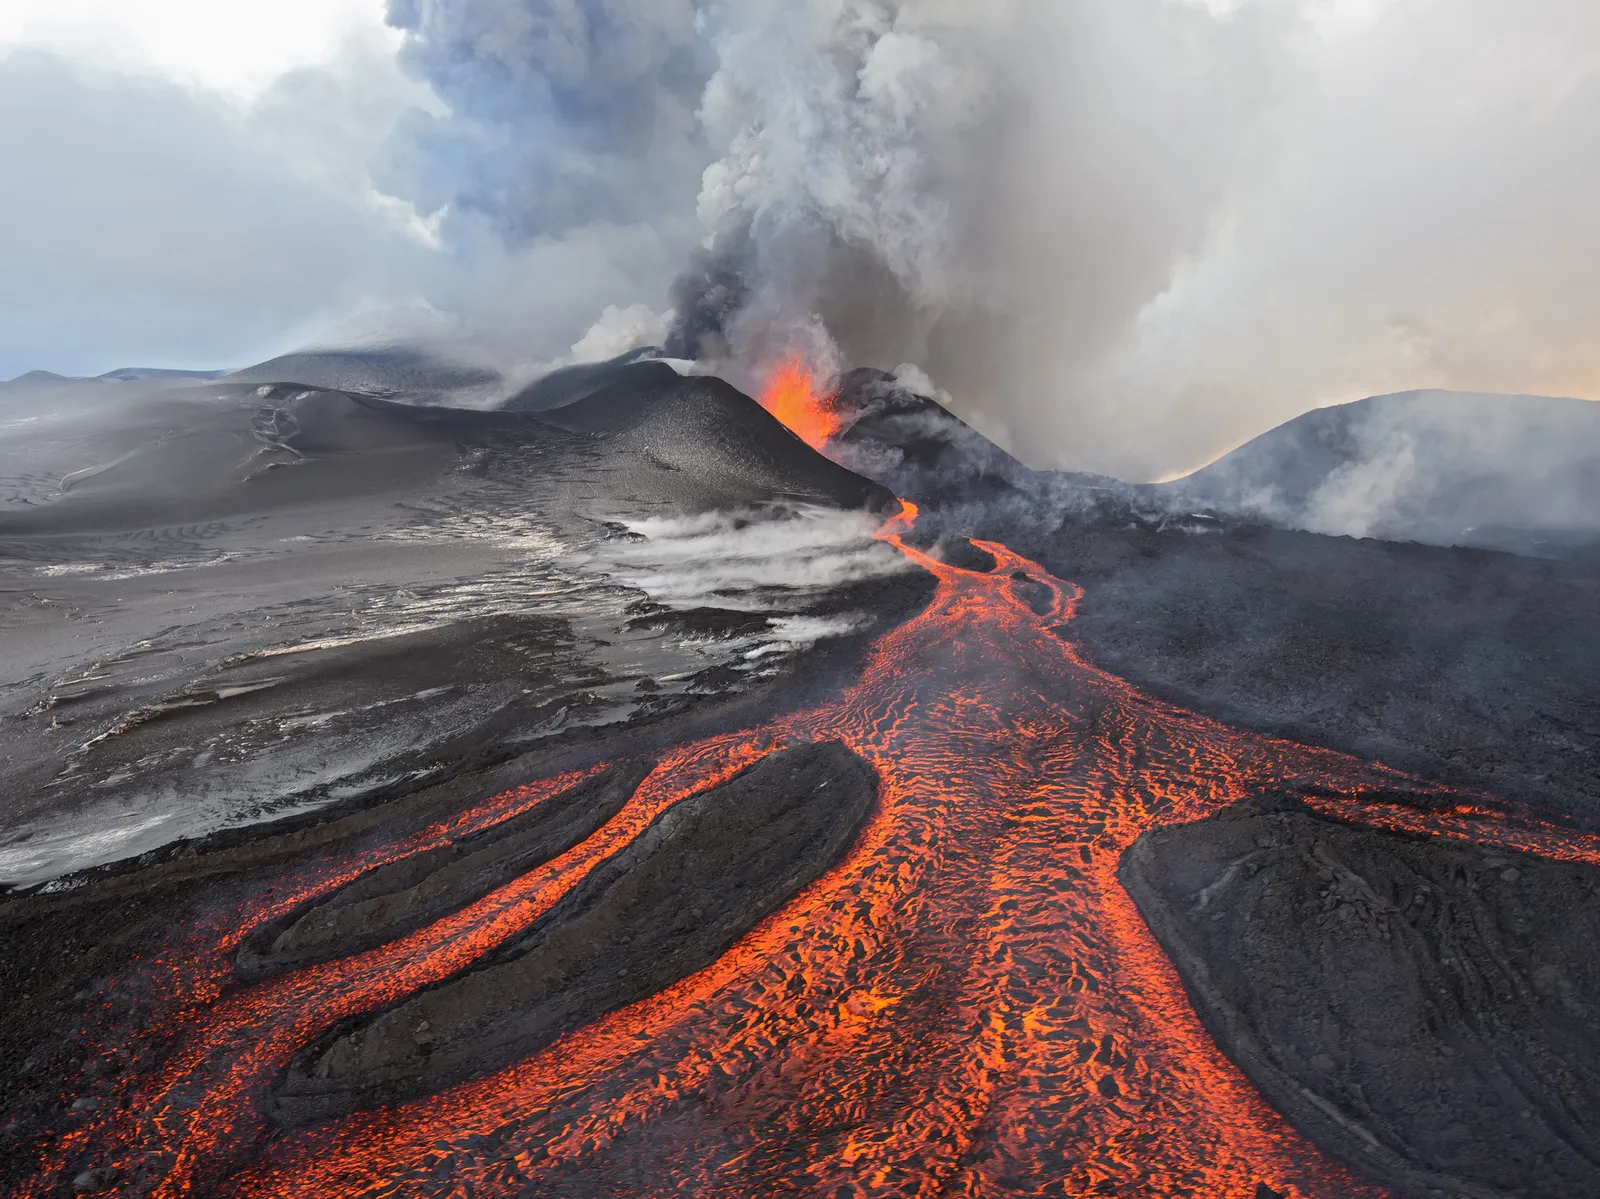 Weird Ways People Have Tried To Stop Lava | Smart News| Smithsonian Magazine